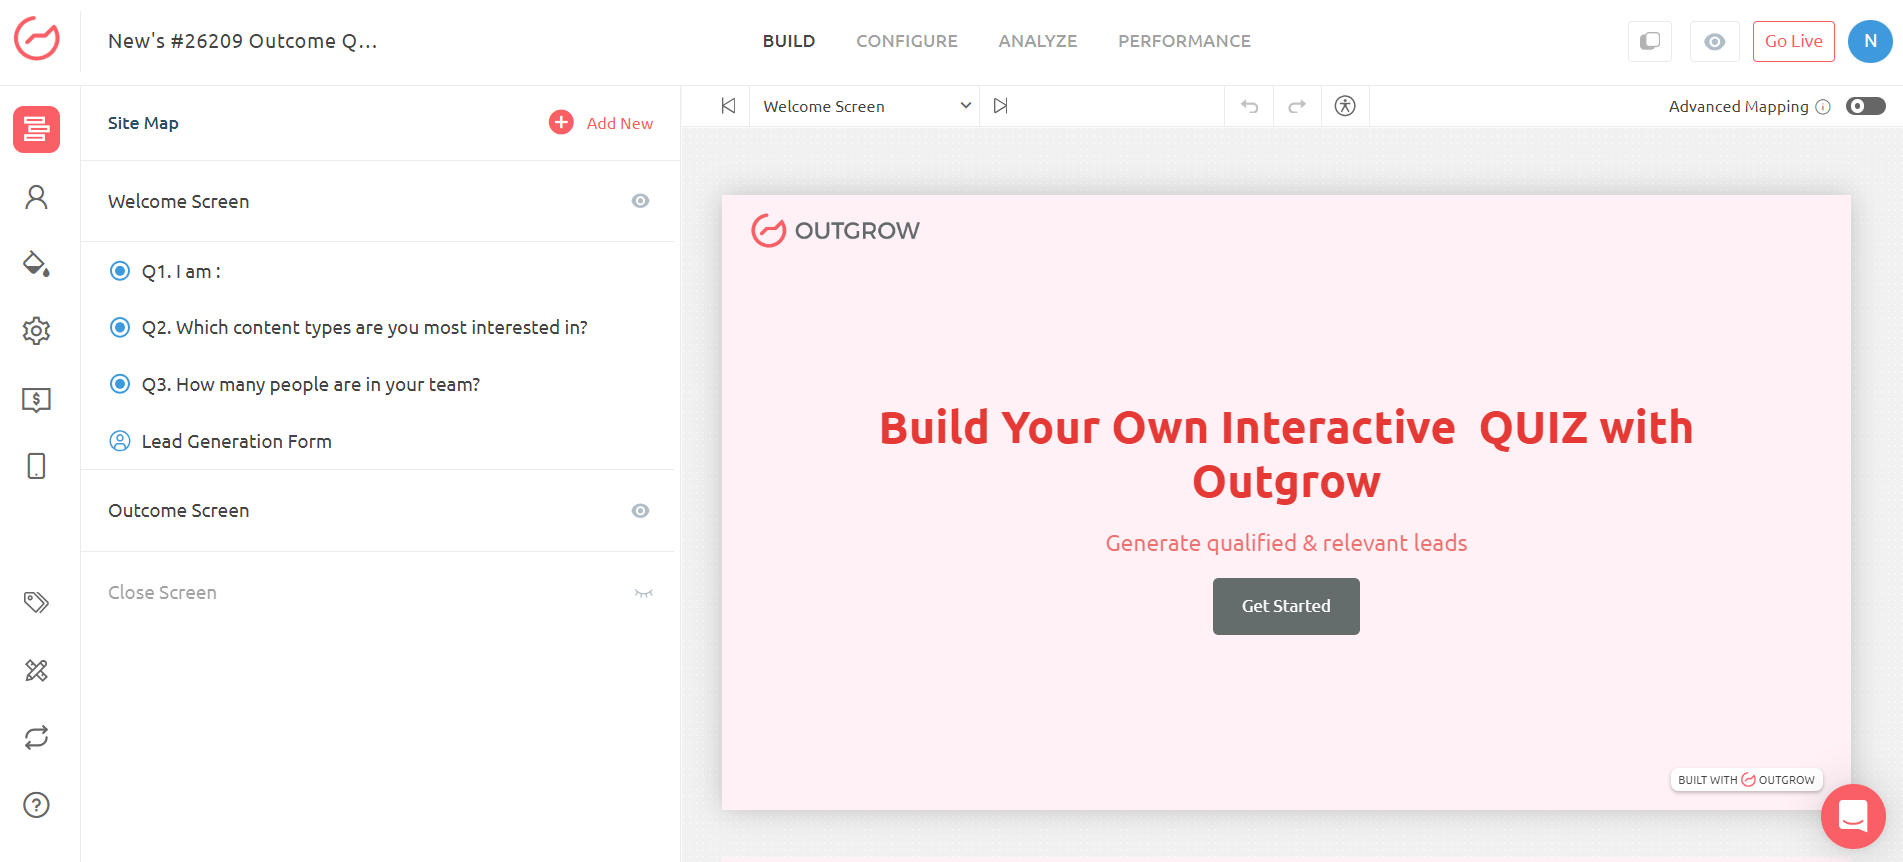 Outgrow's quiz builder's welcome page